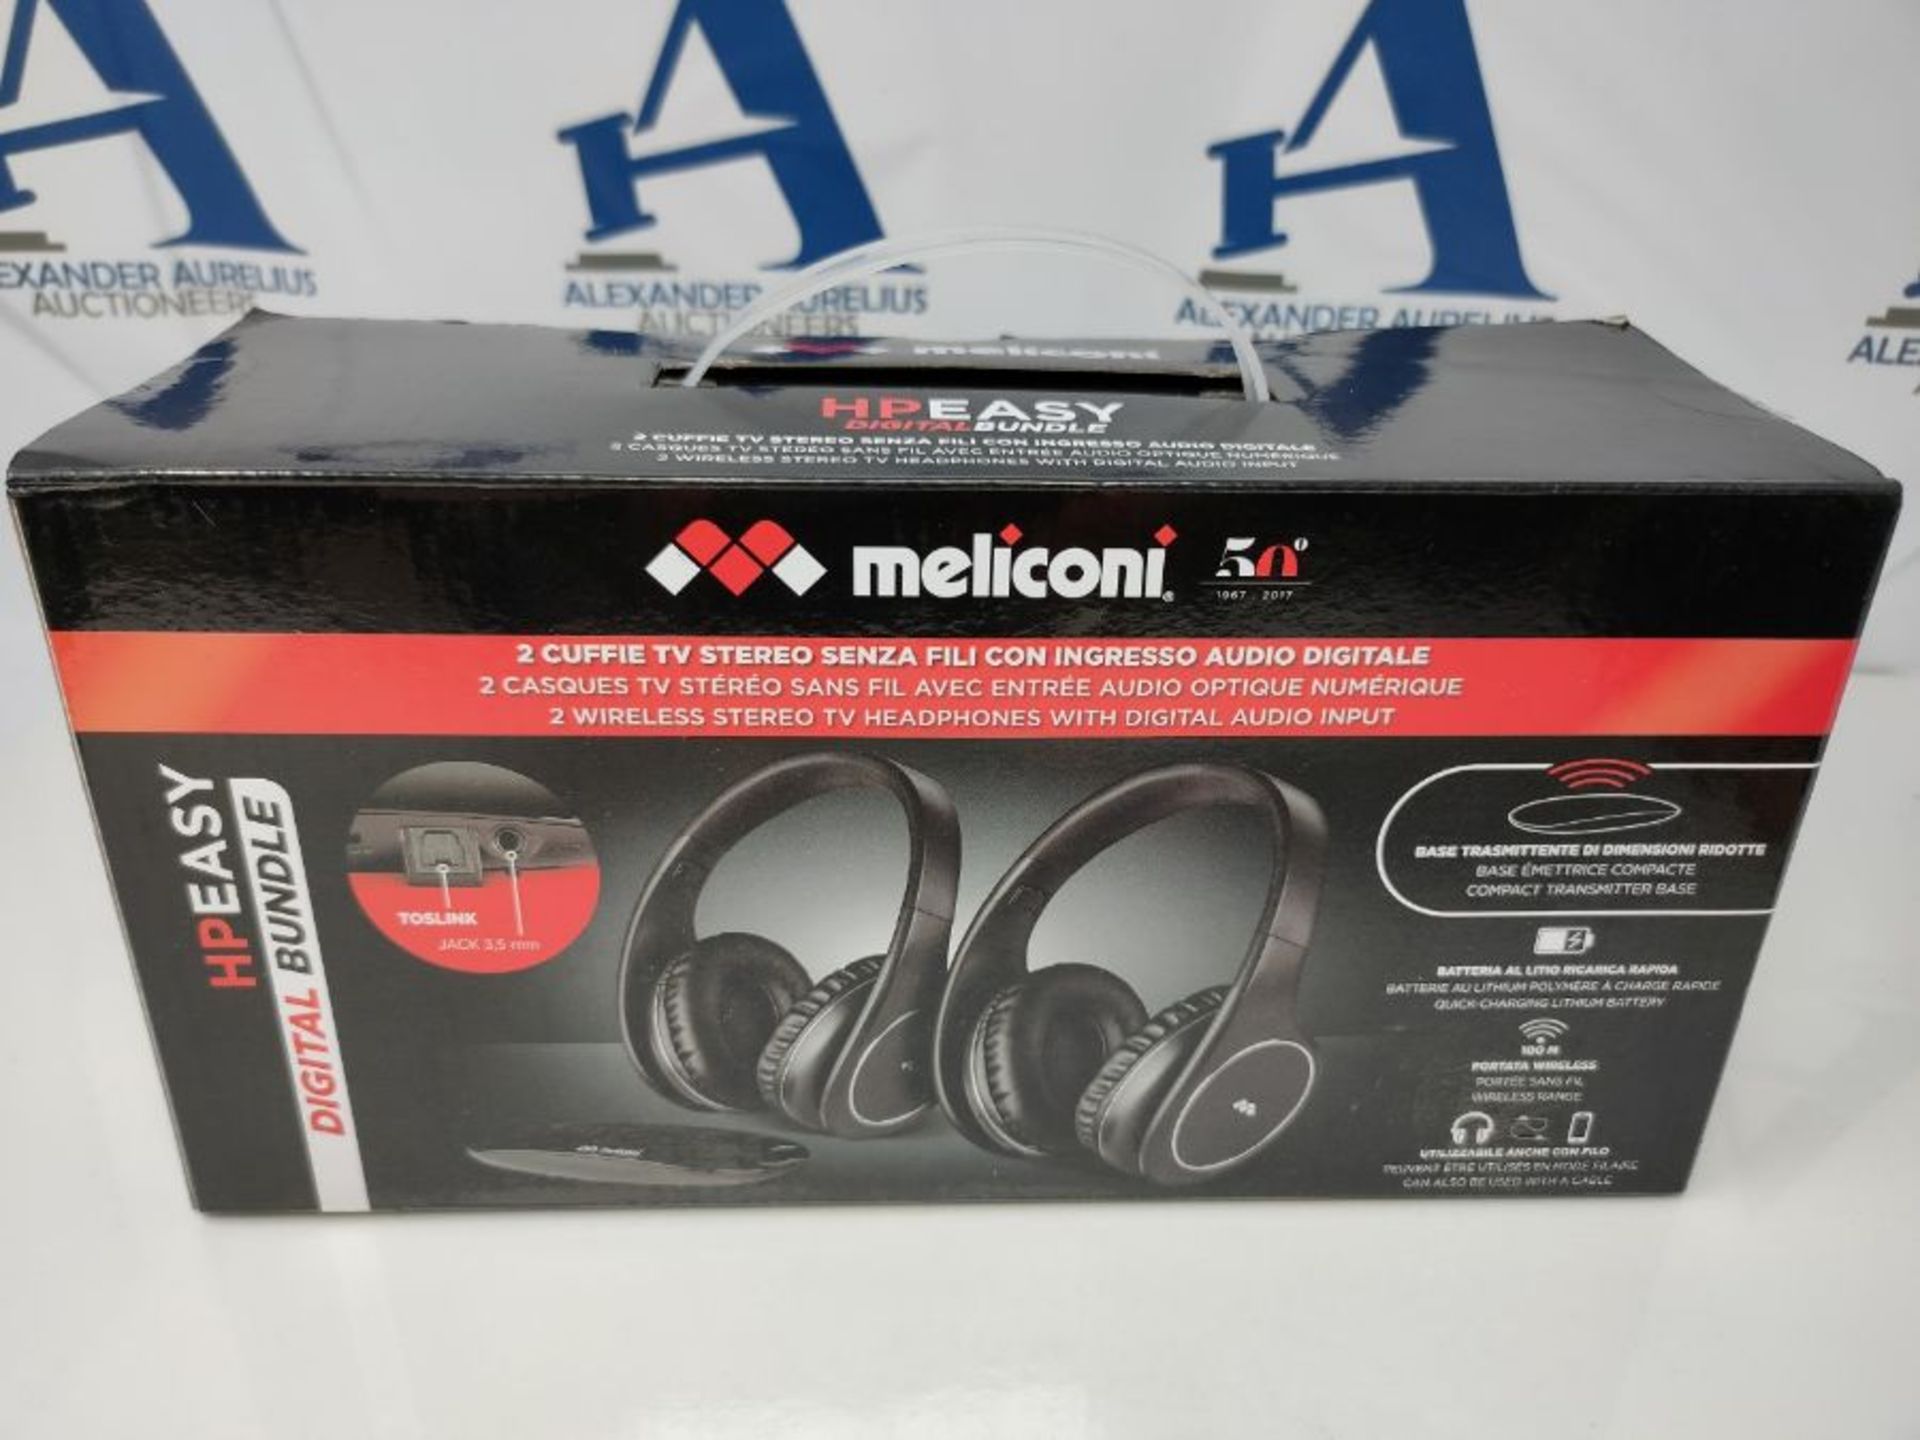 RRP £94.00 Meliconi HP Easy Digital Bundle, 2 drahtlose Stereo-TV-Headsets, 100% digital, mit ana - Image 2 of 3